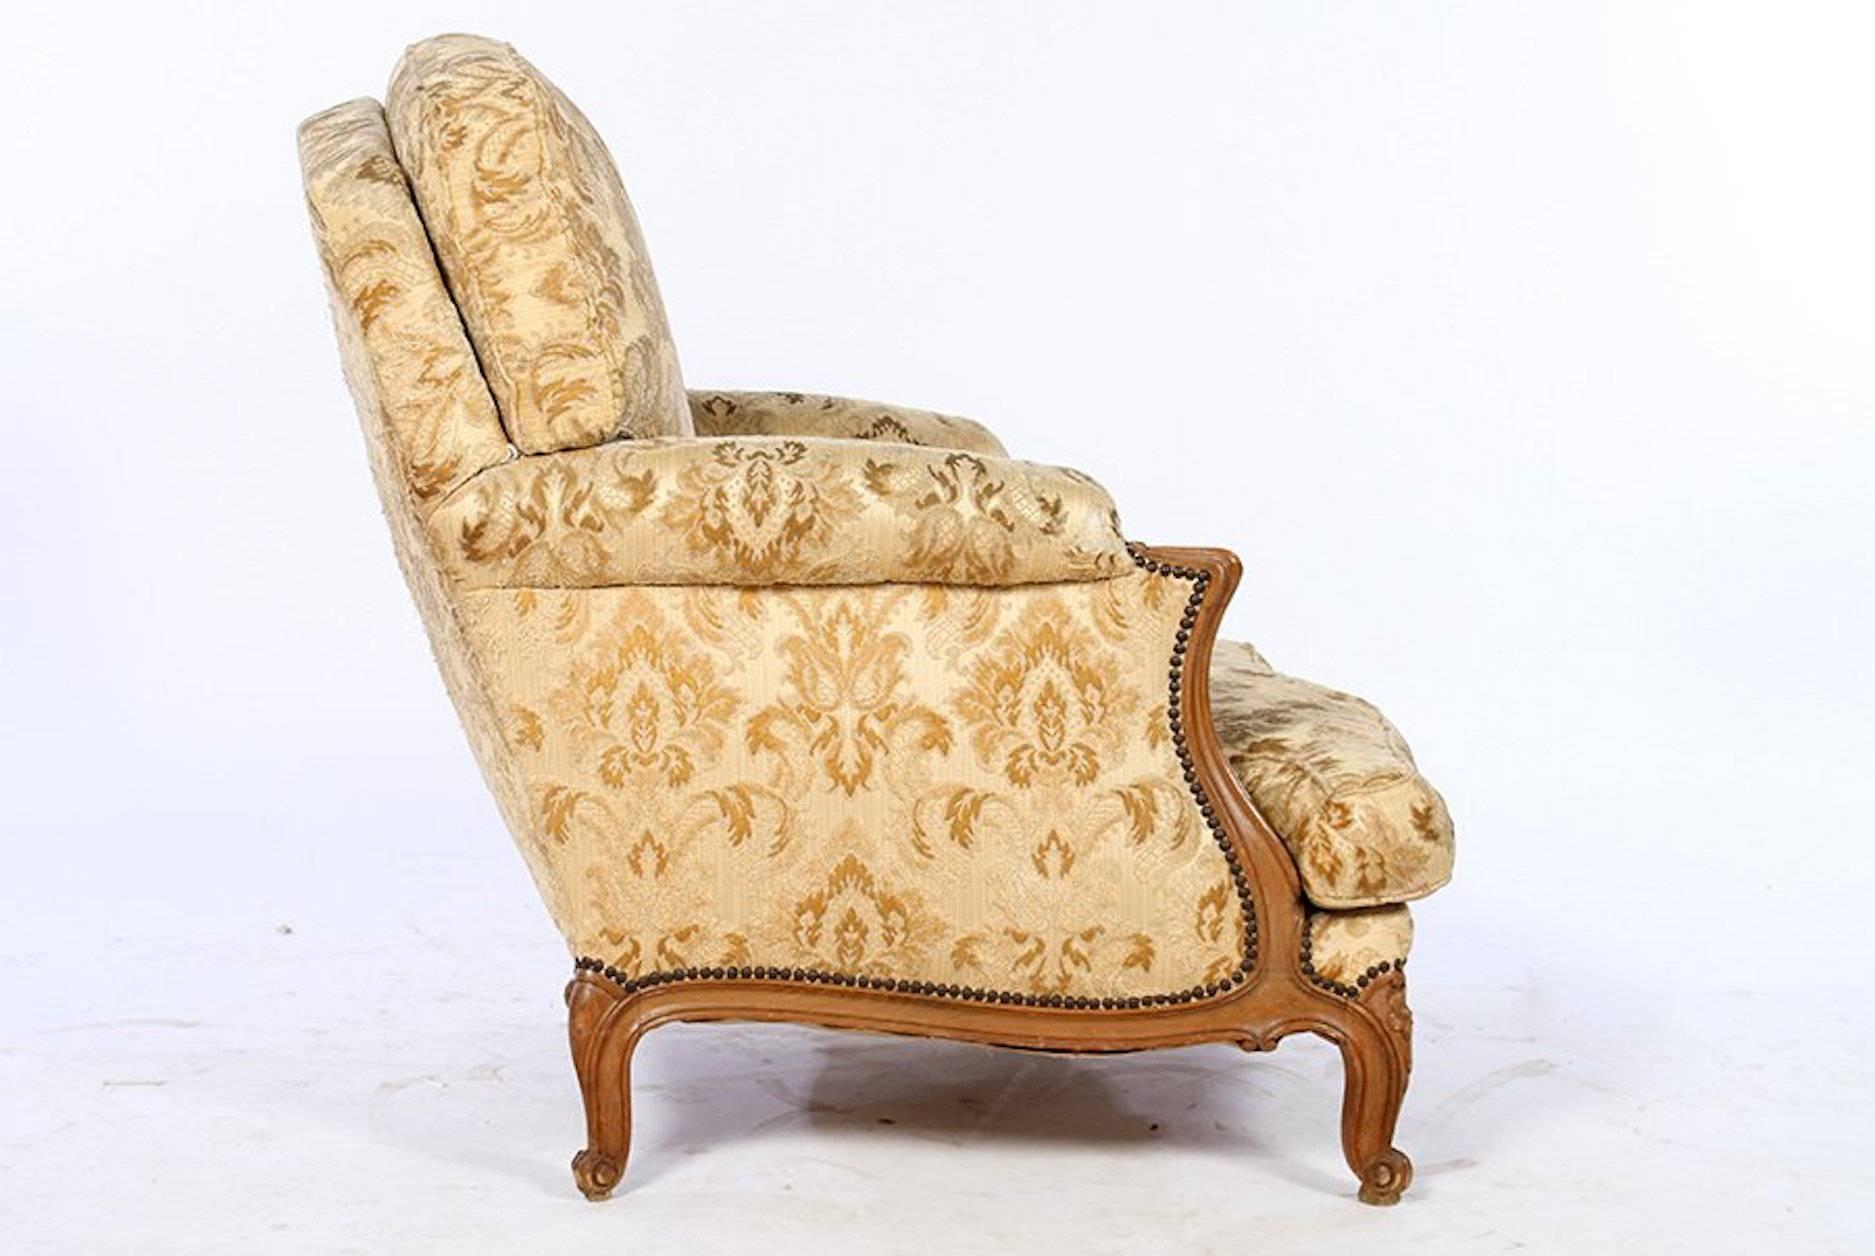 A pair of French Louis XV style carved walnut upholstered bergeres.

Dimensions: Height 38", width 28", depth 34".